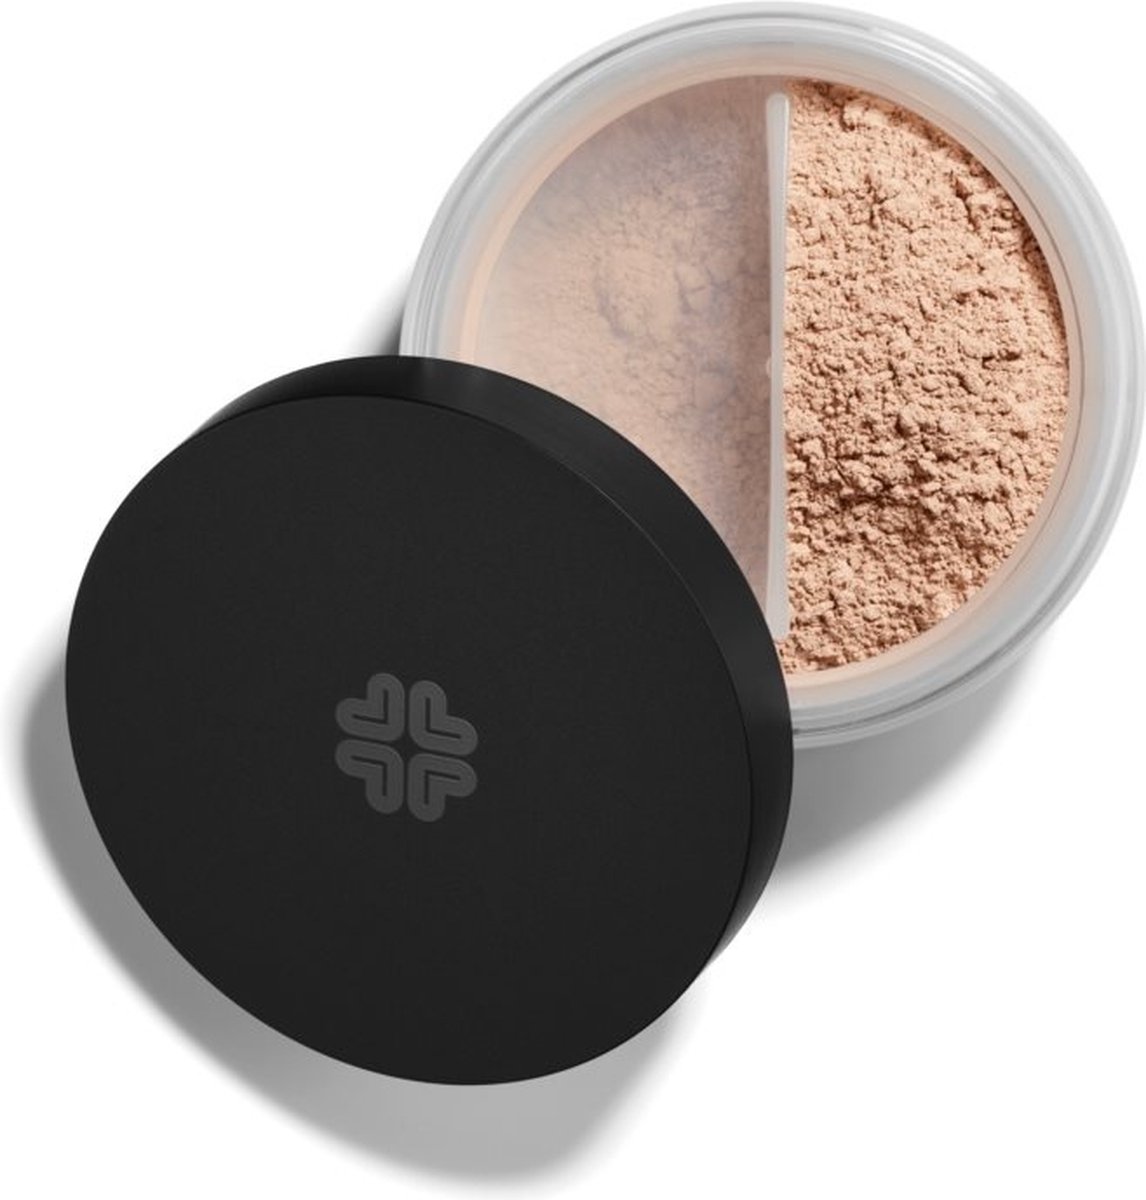 Lily Lolo Mineral Foundation SPF 15 Candy Cane